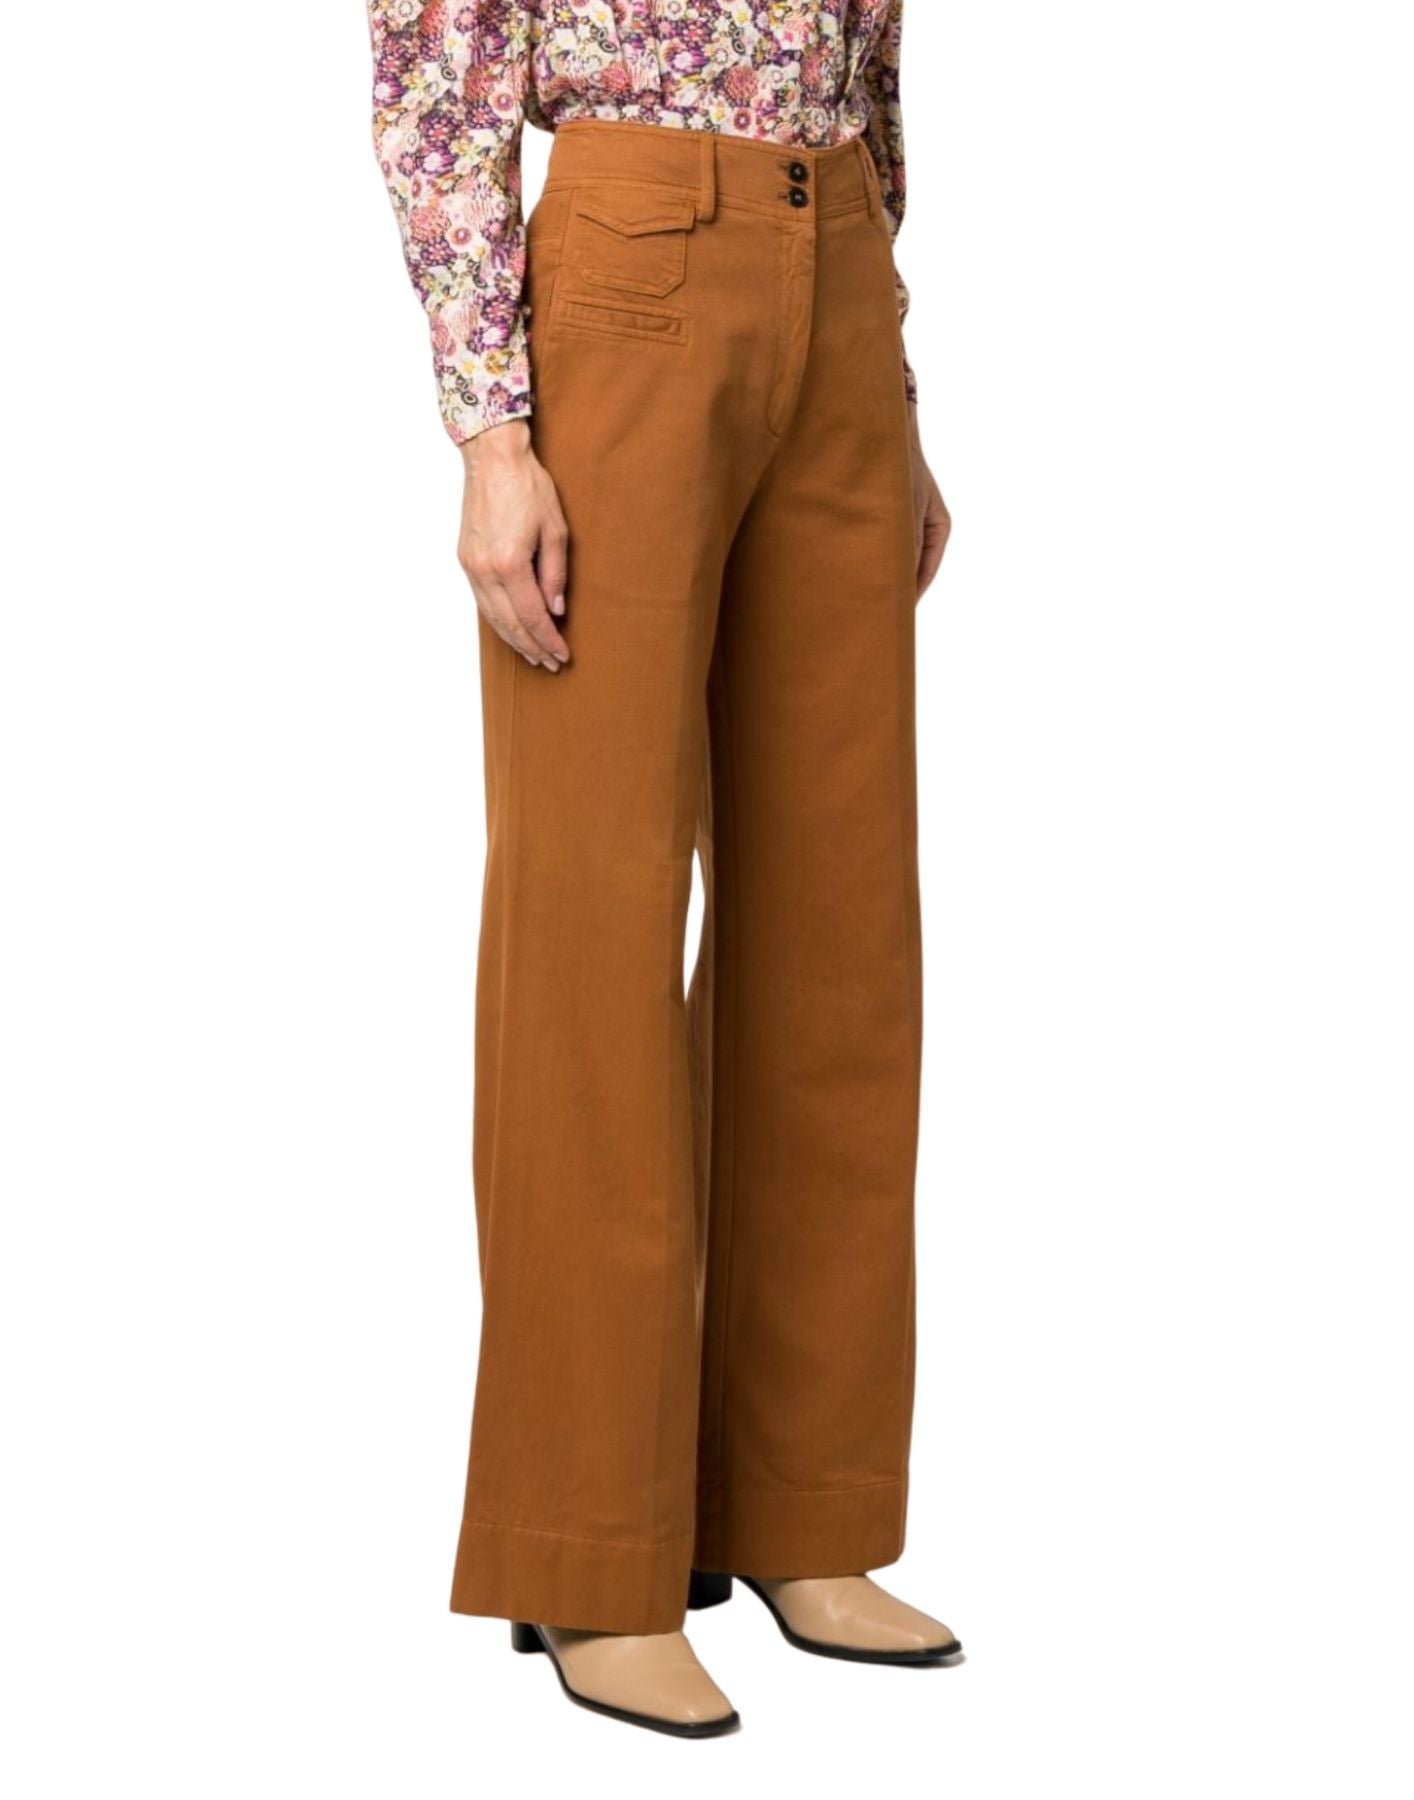 Pants for woman 10644 MY PANTS TERRE FORTE_FORTE